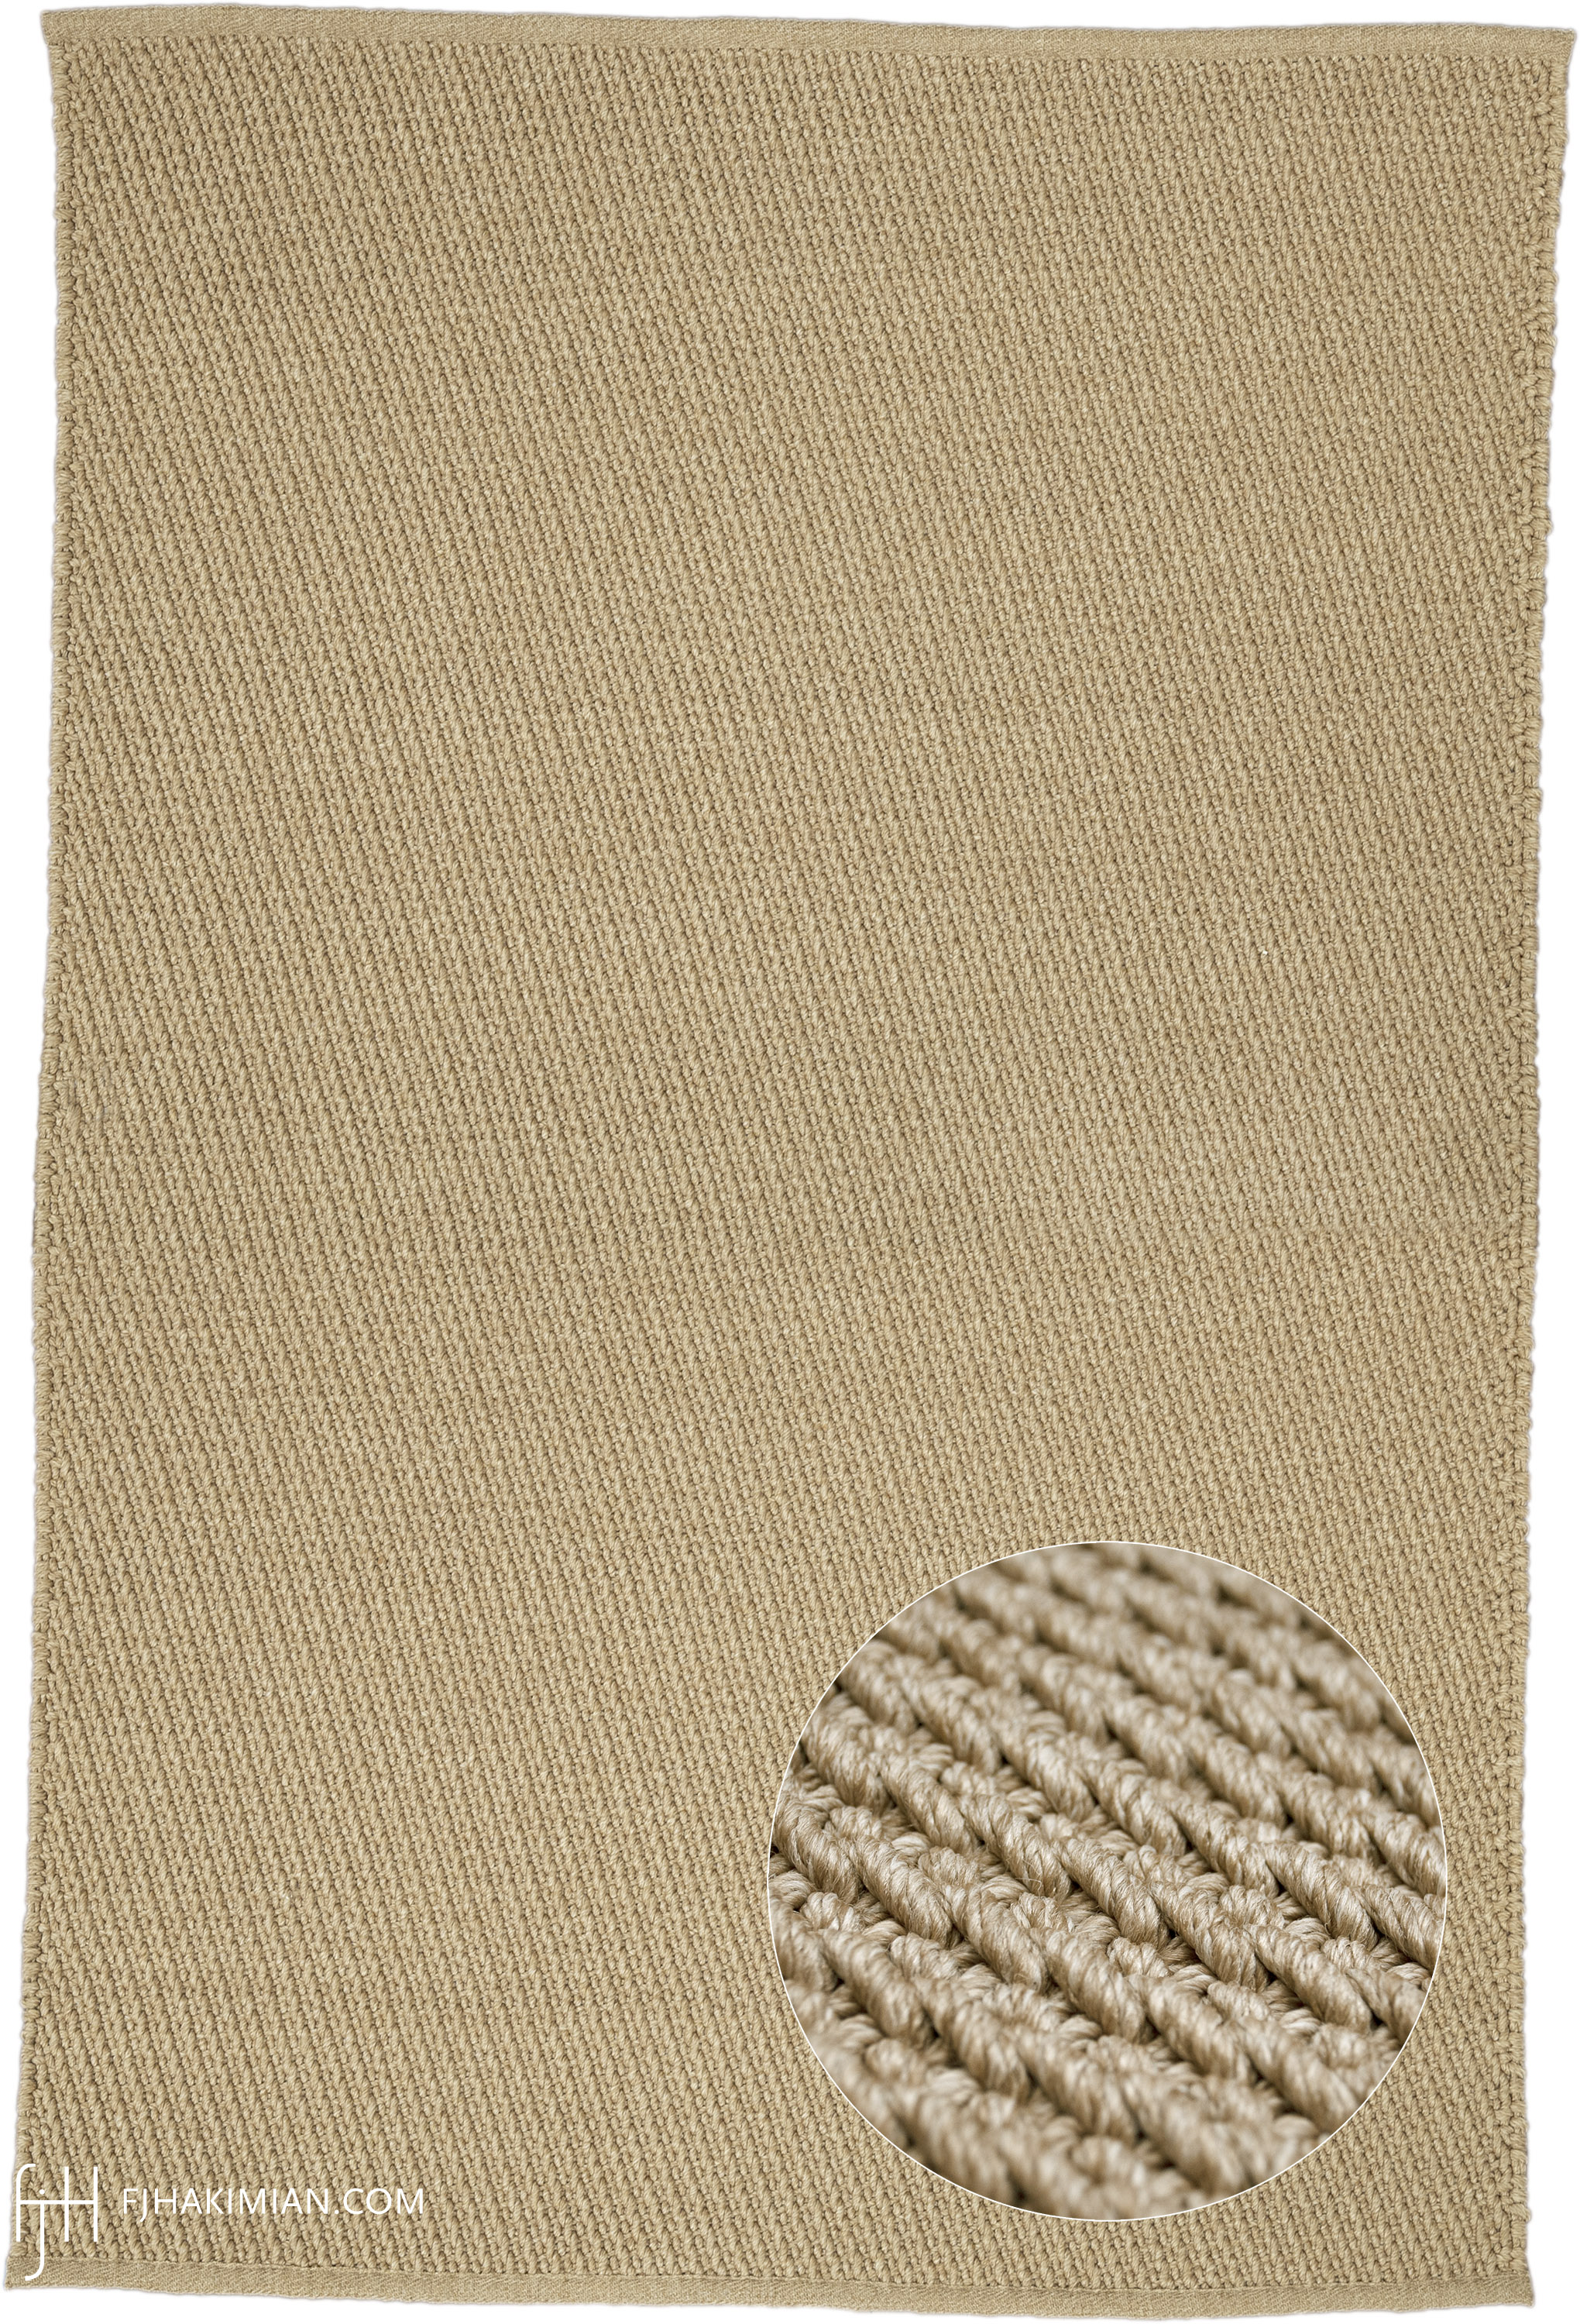 FC-Dominica Sand-Indian Outdoor Rug | FJ Hakimian Carpet Gallery, New York 